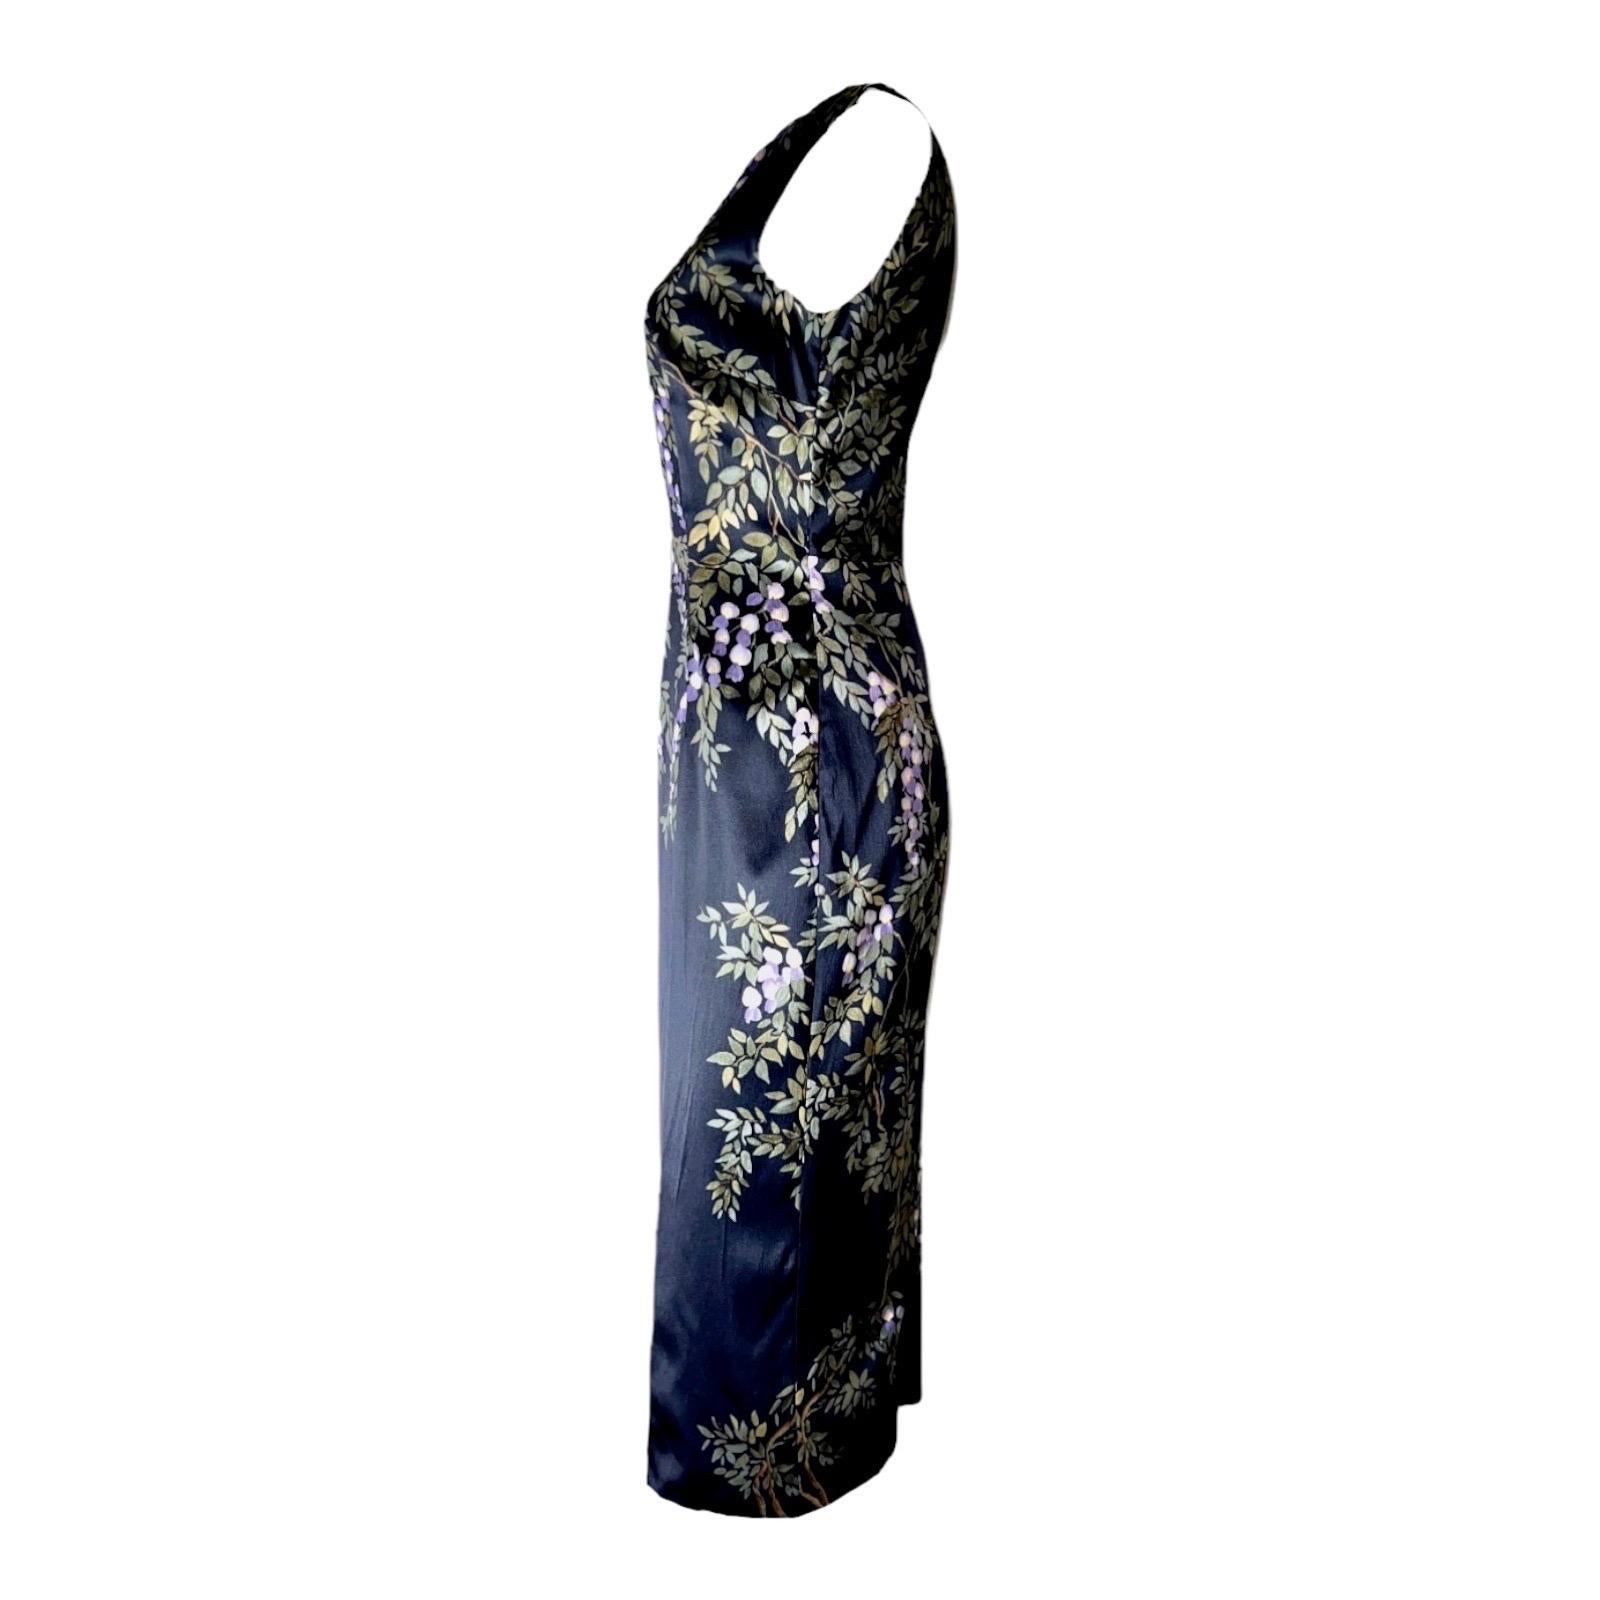 Unique Dolce & Gabbana Evening Dress
    Beautifully hand-painted silk print with floral design
    Zipper in the back
    The dress is a special piece and one of a kind, you will hardly find someone in exactly the same dress
Made in Italy
Dry Clean